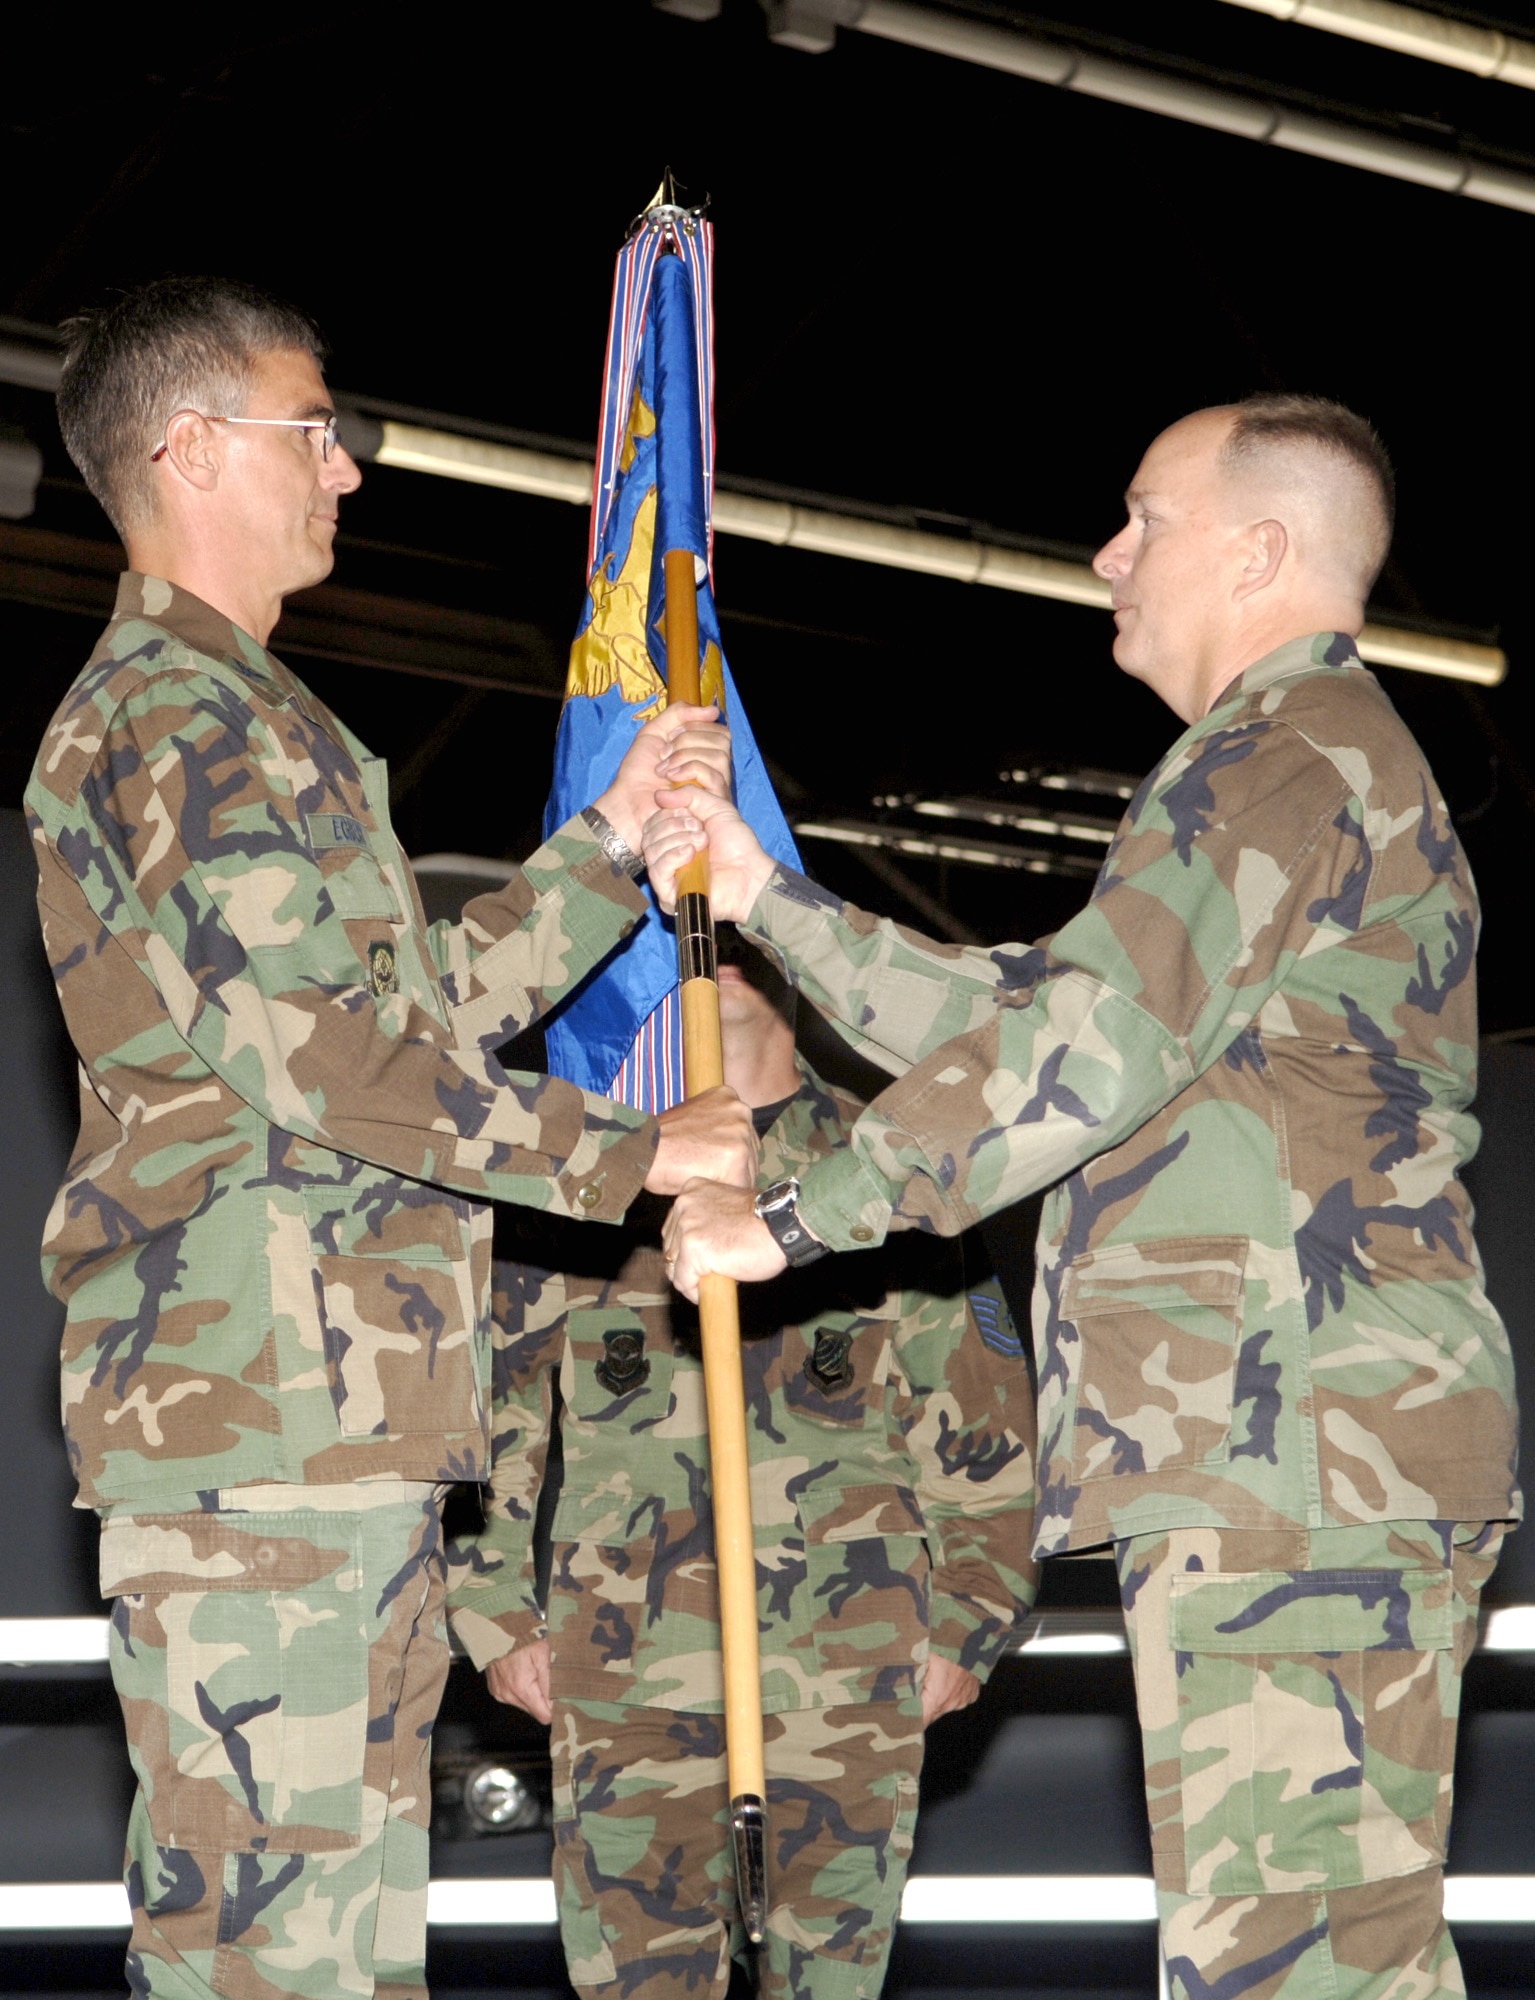 FAIRCHILD AIR FORCE BASE, Wash. – Maj. Robert Moore, the new 92nd Aircraft Maintenance Squadron commander, takes hold of the squadron flag as it is passed to him by Col. Robert Egbert, 92nd Maintenance Group commander, during a change-of command ceremony here Aug. 9. Major Moore assumed command from outgoing squadron commander Lt. Col. David Yockey. (U.S. Air Force photo / Senior Airman Chad Watkins)